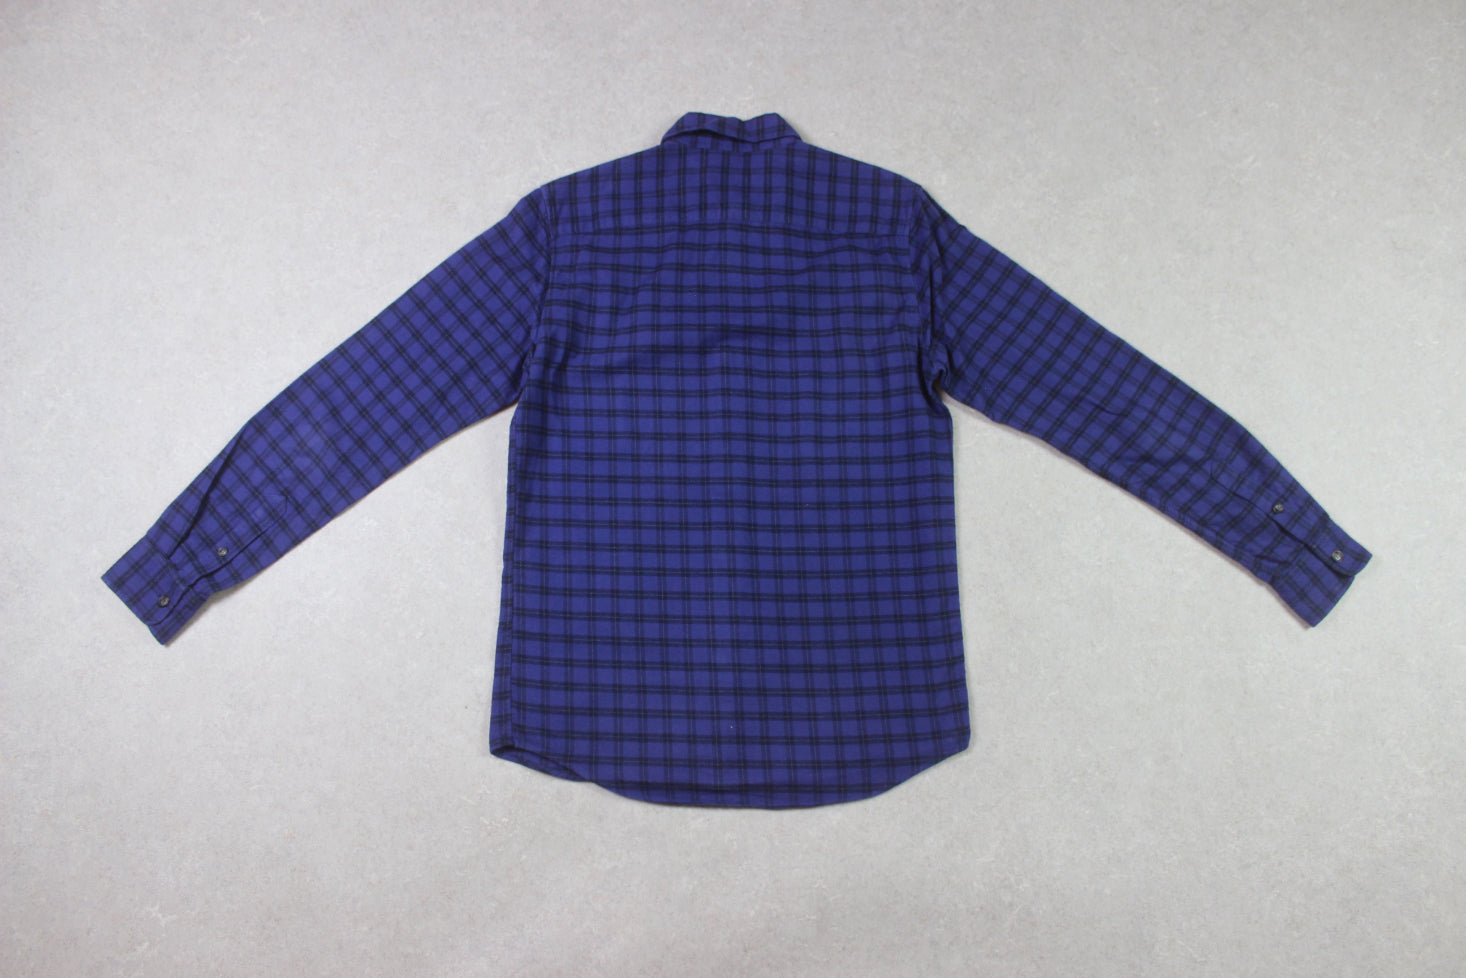 A.P.C. - Flannel Shirt - Purple/Black Check - Extra Small